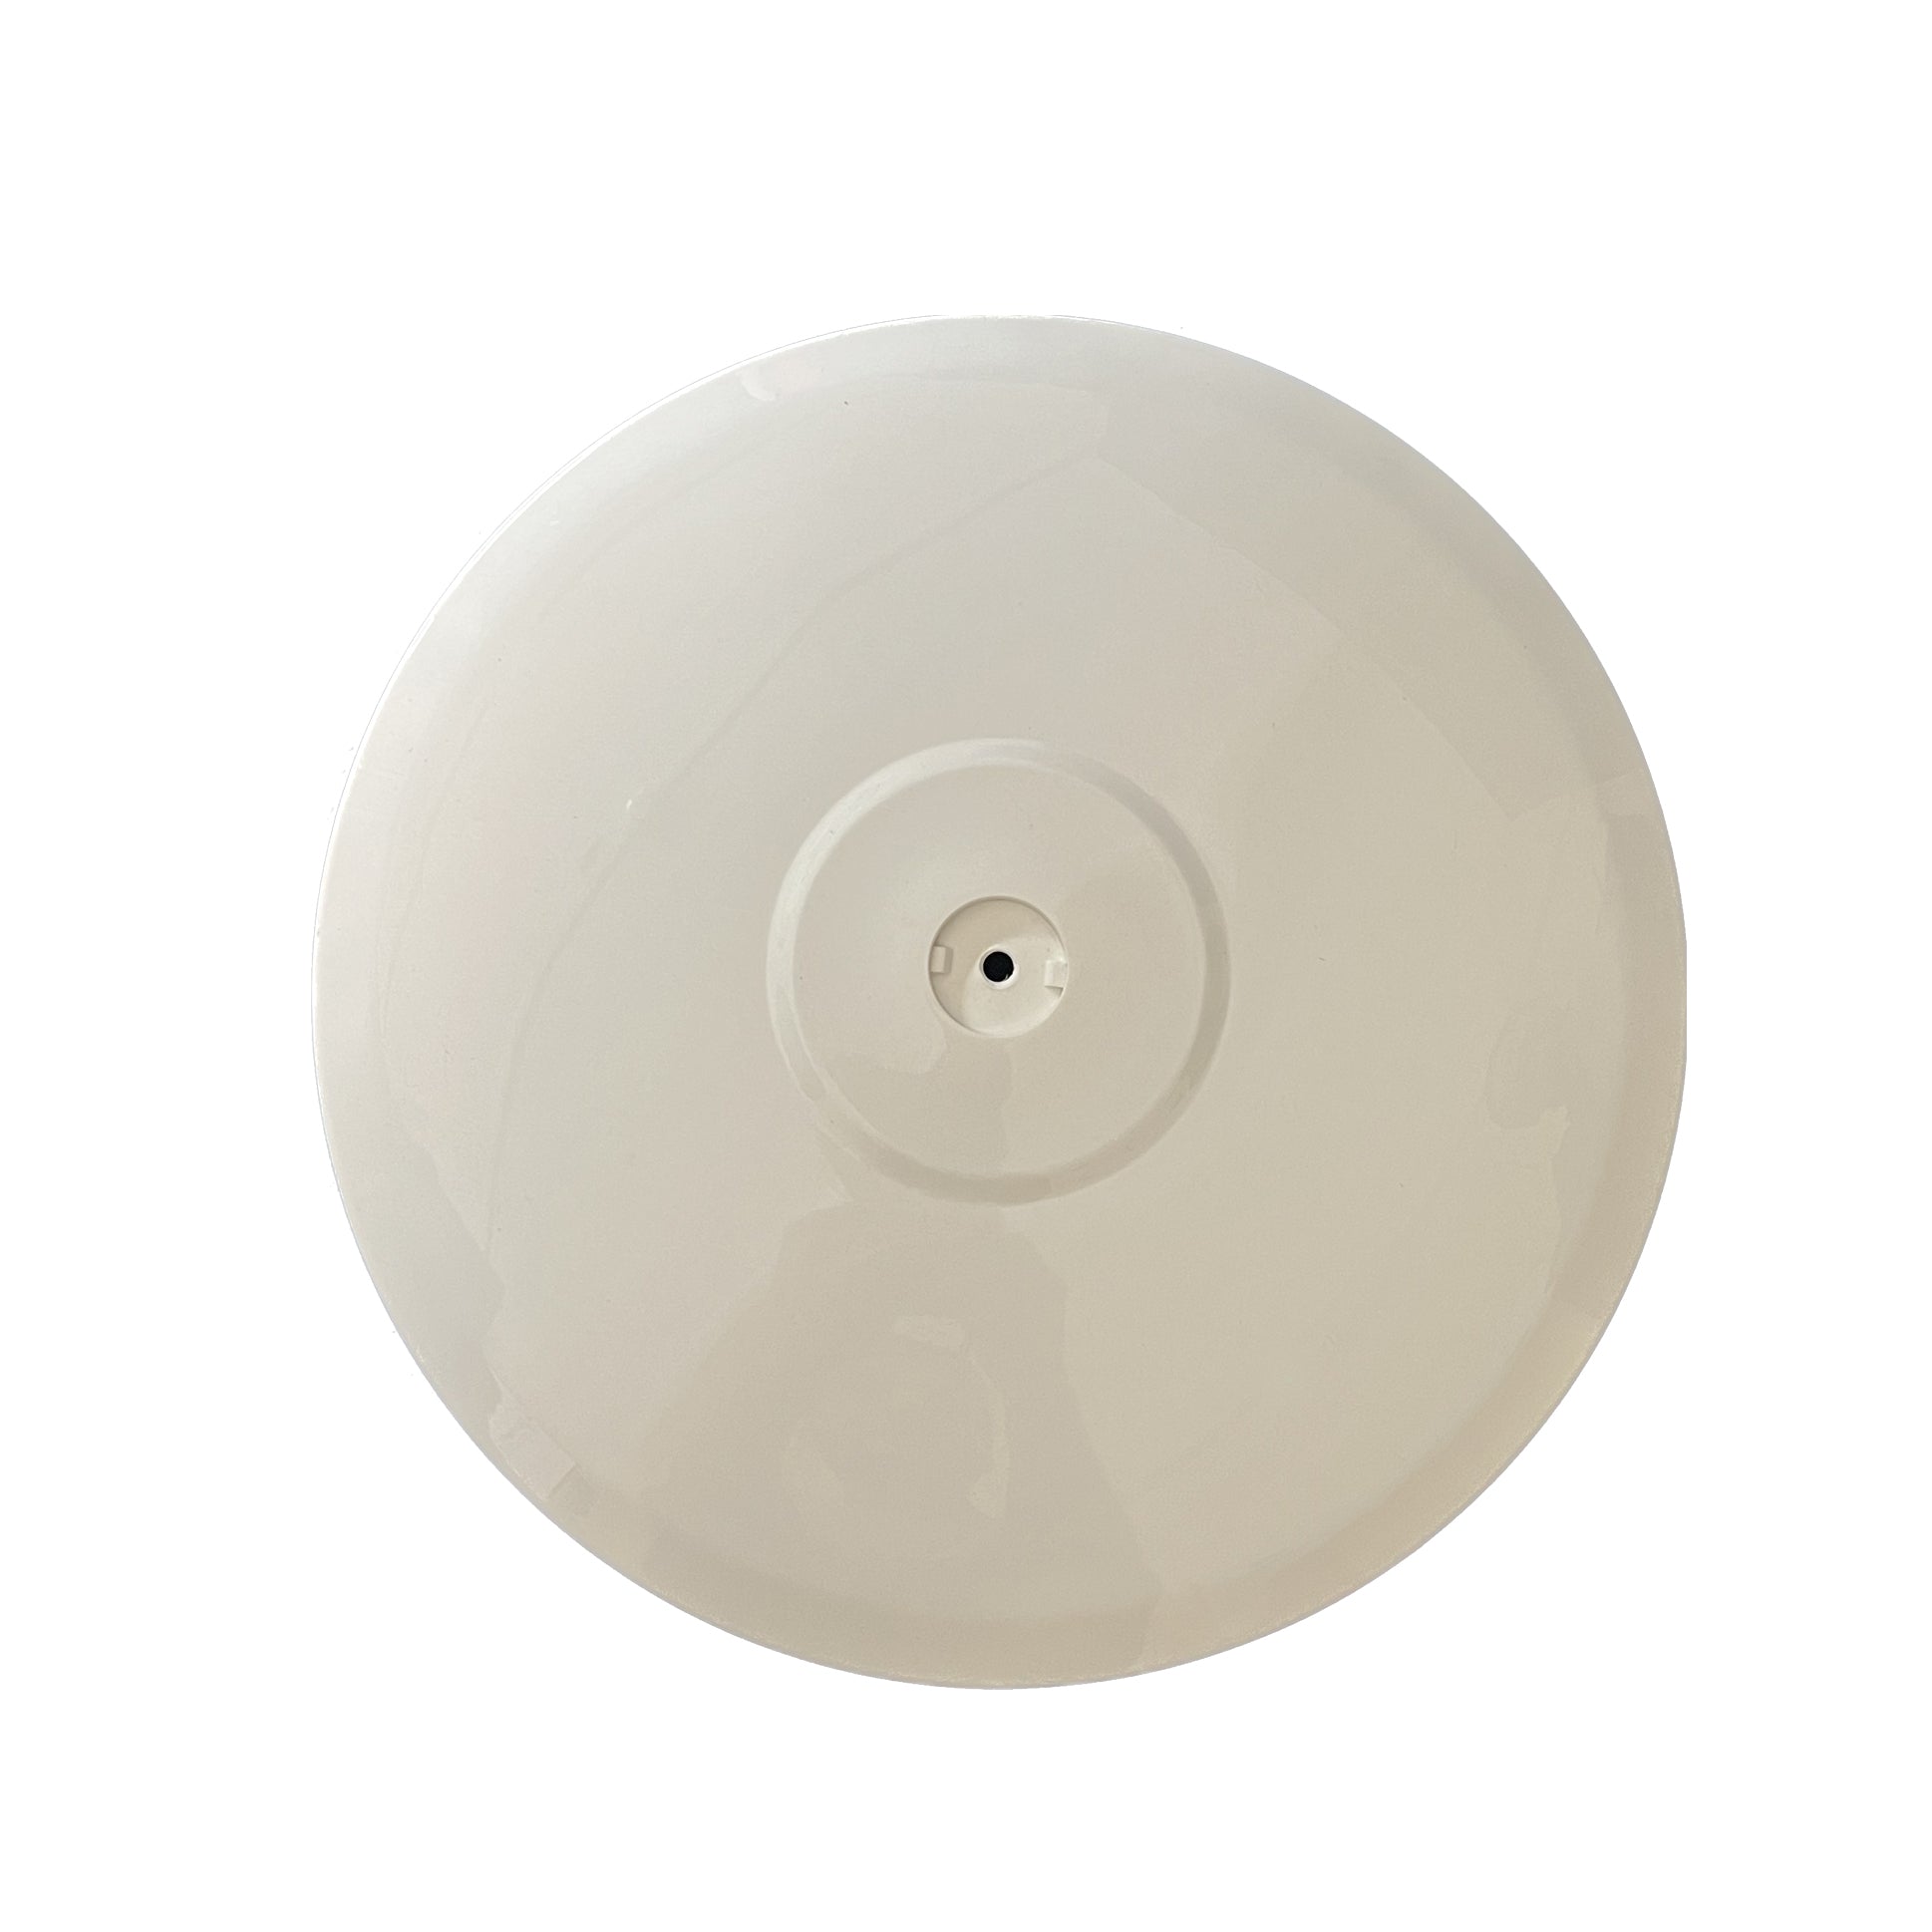 Replacement Base For 16 Inch Pedestal Fan - White